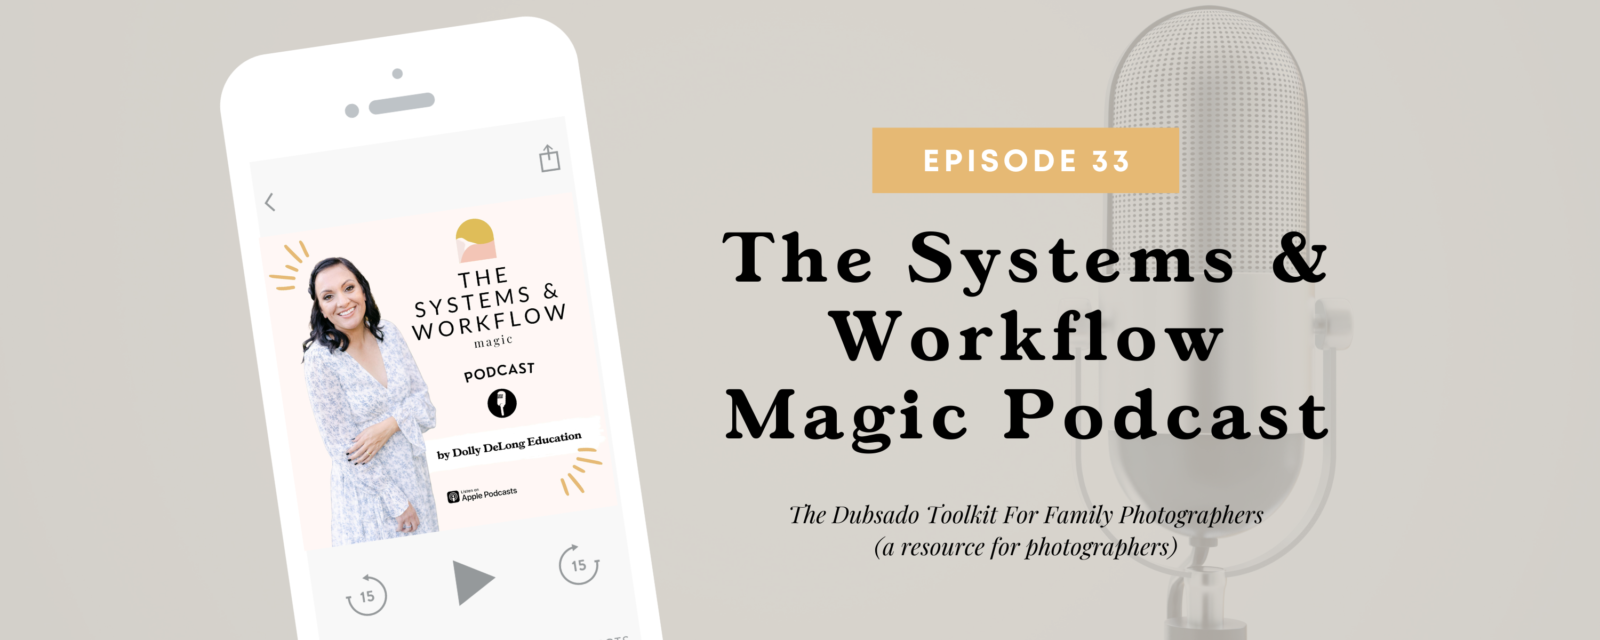 Episode 33 of the Systems and Workflow Magic Podcast